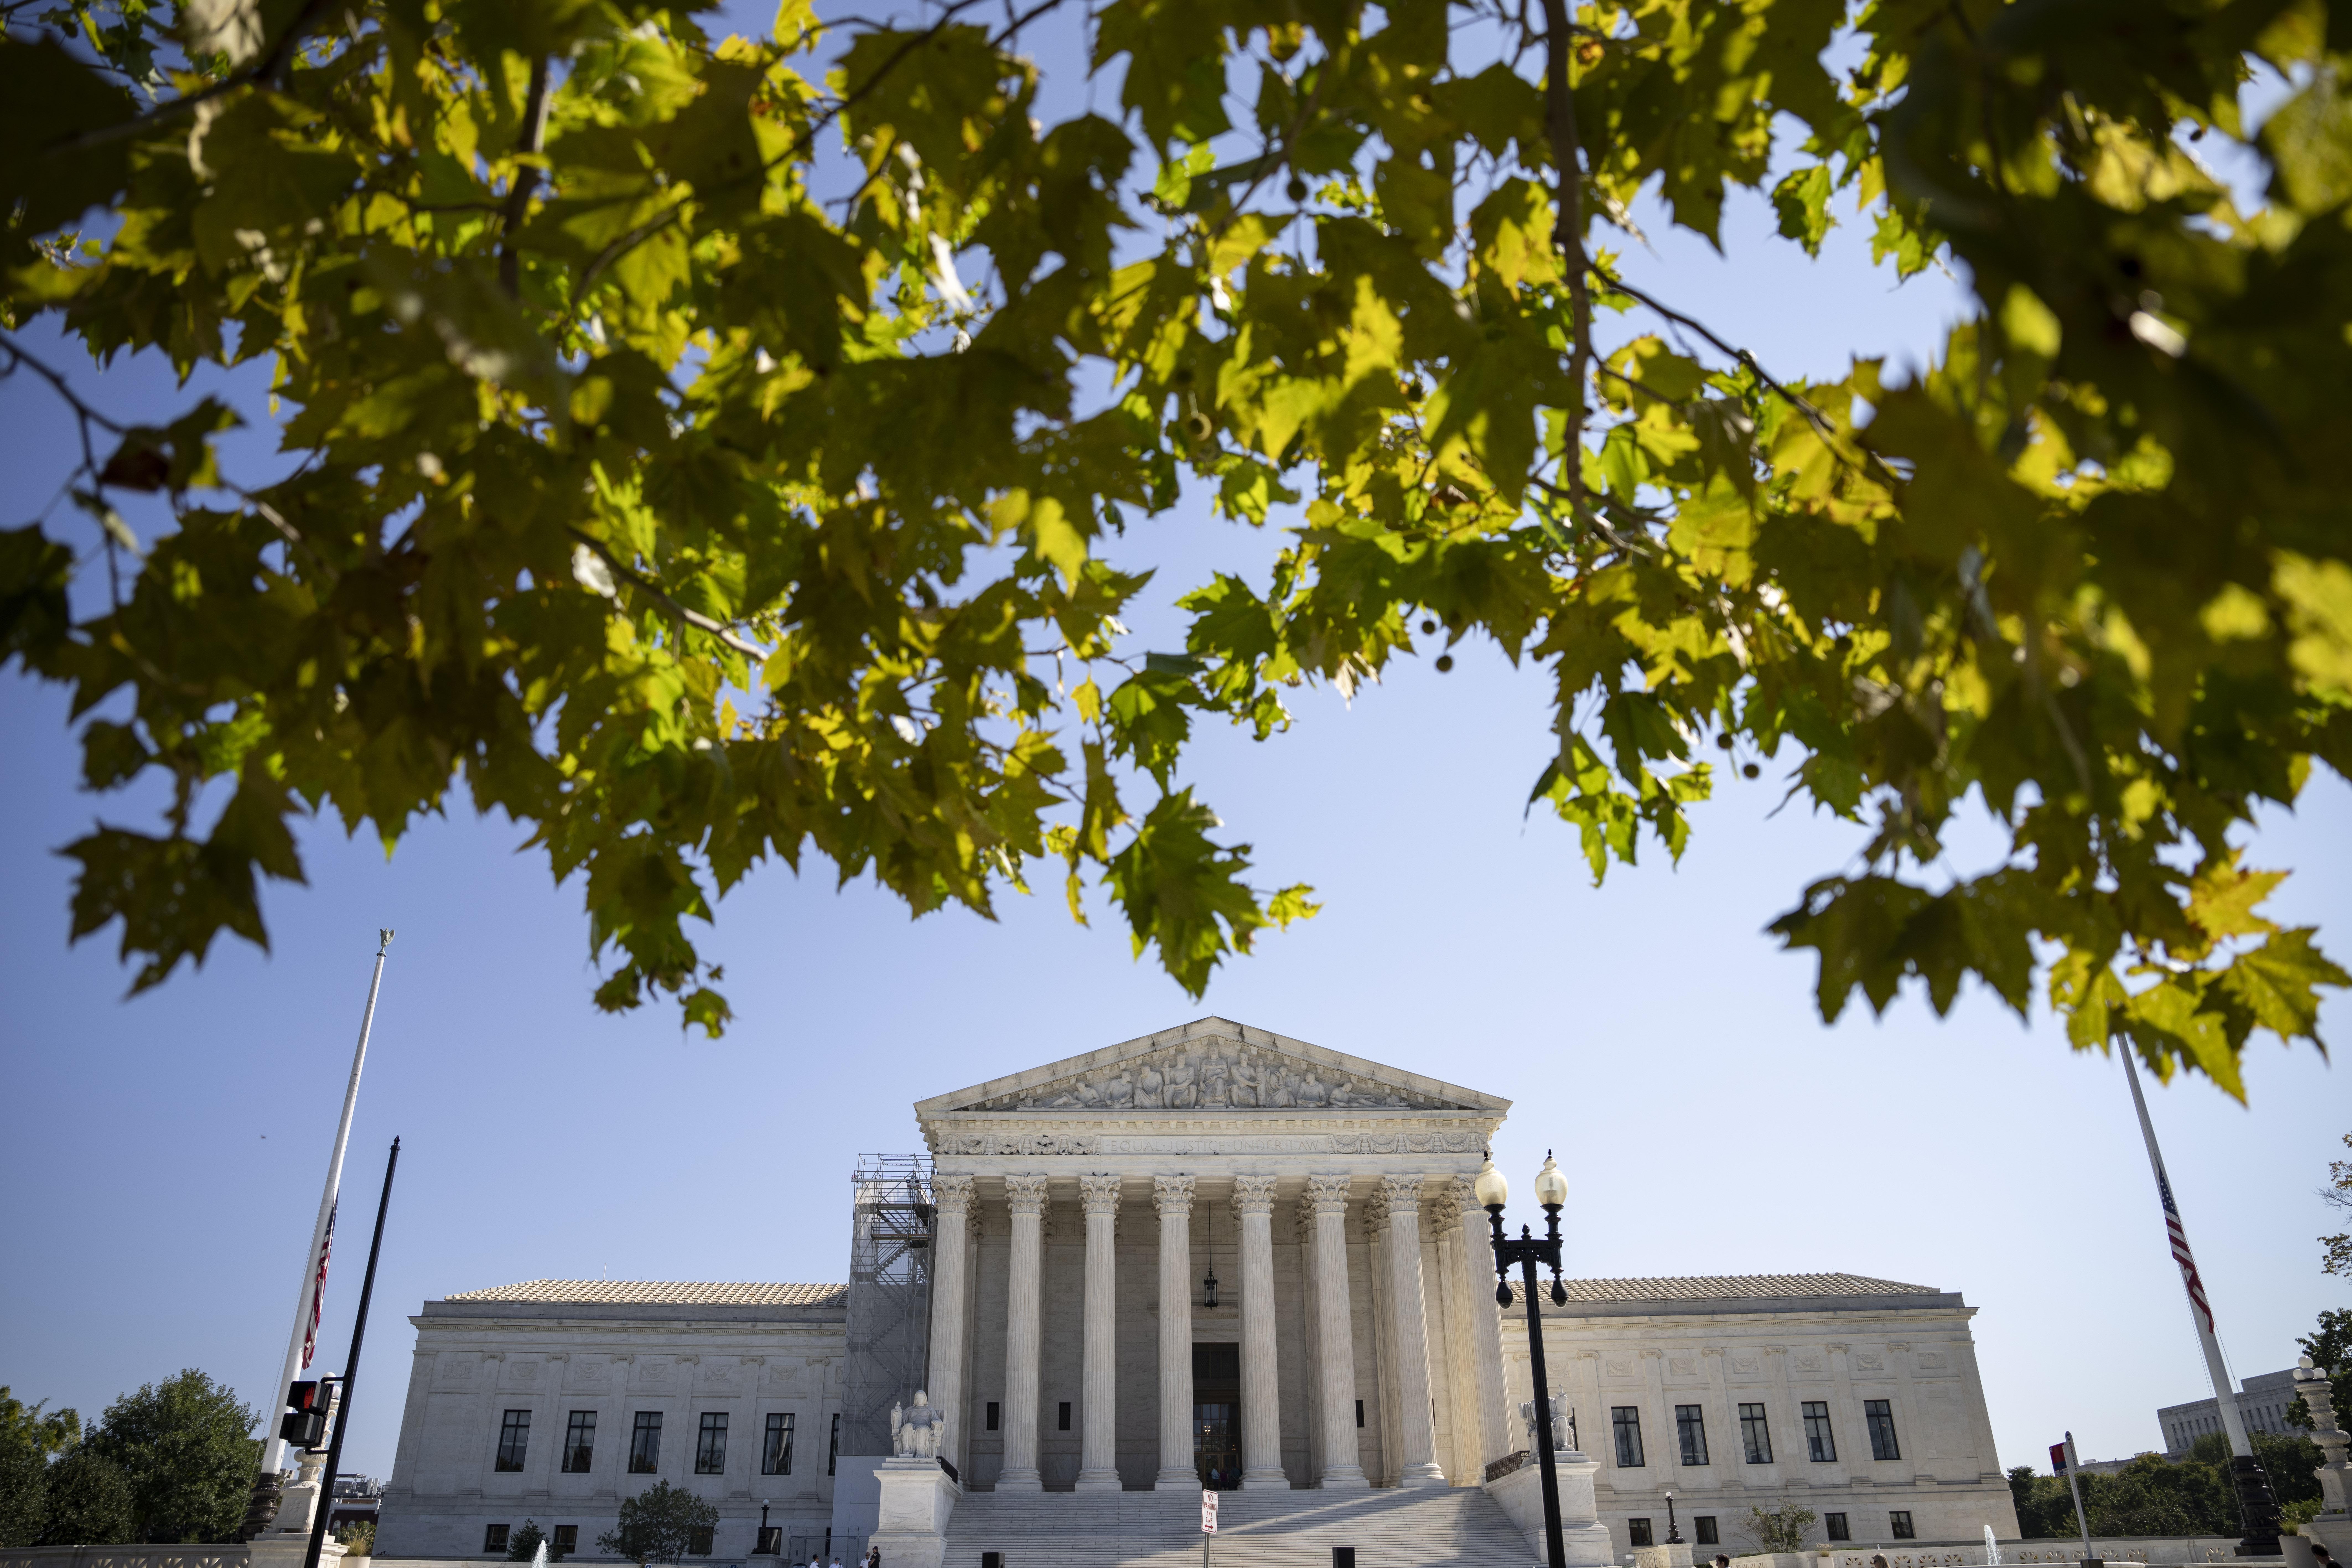  A view of the U.S. Supreme Court—the Court is in the background, with tree branches in the foreground.